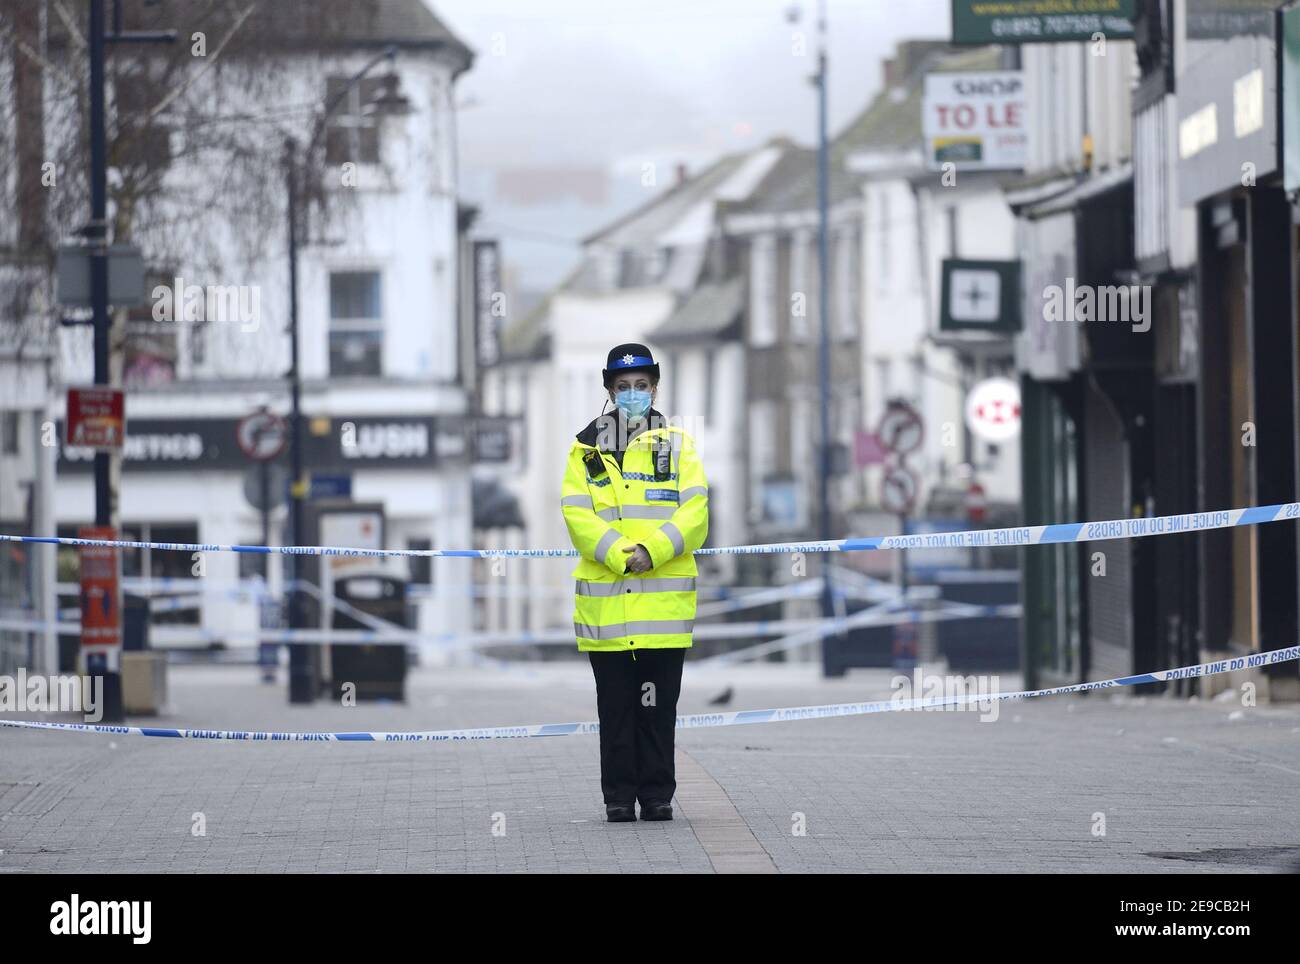 Maidstone, Kent, UK. 4th February. A man was rushed to a London hospital with 'life threatening injuries' after being stabbed in Maidstone town centre at around 7pm on Feb 3rd. This morning an area of the town is still cordoned off - a man in his 40s has been arrested. Credit: Phil Robinson/Alamy Live News Stock Photo